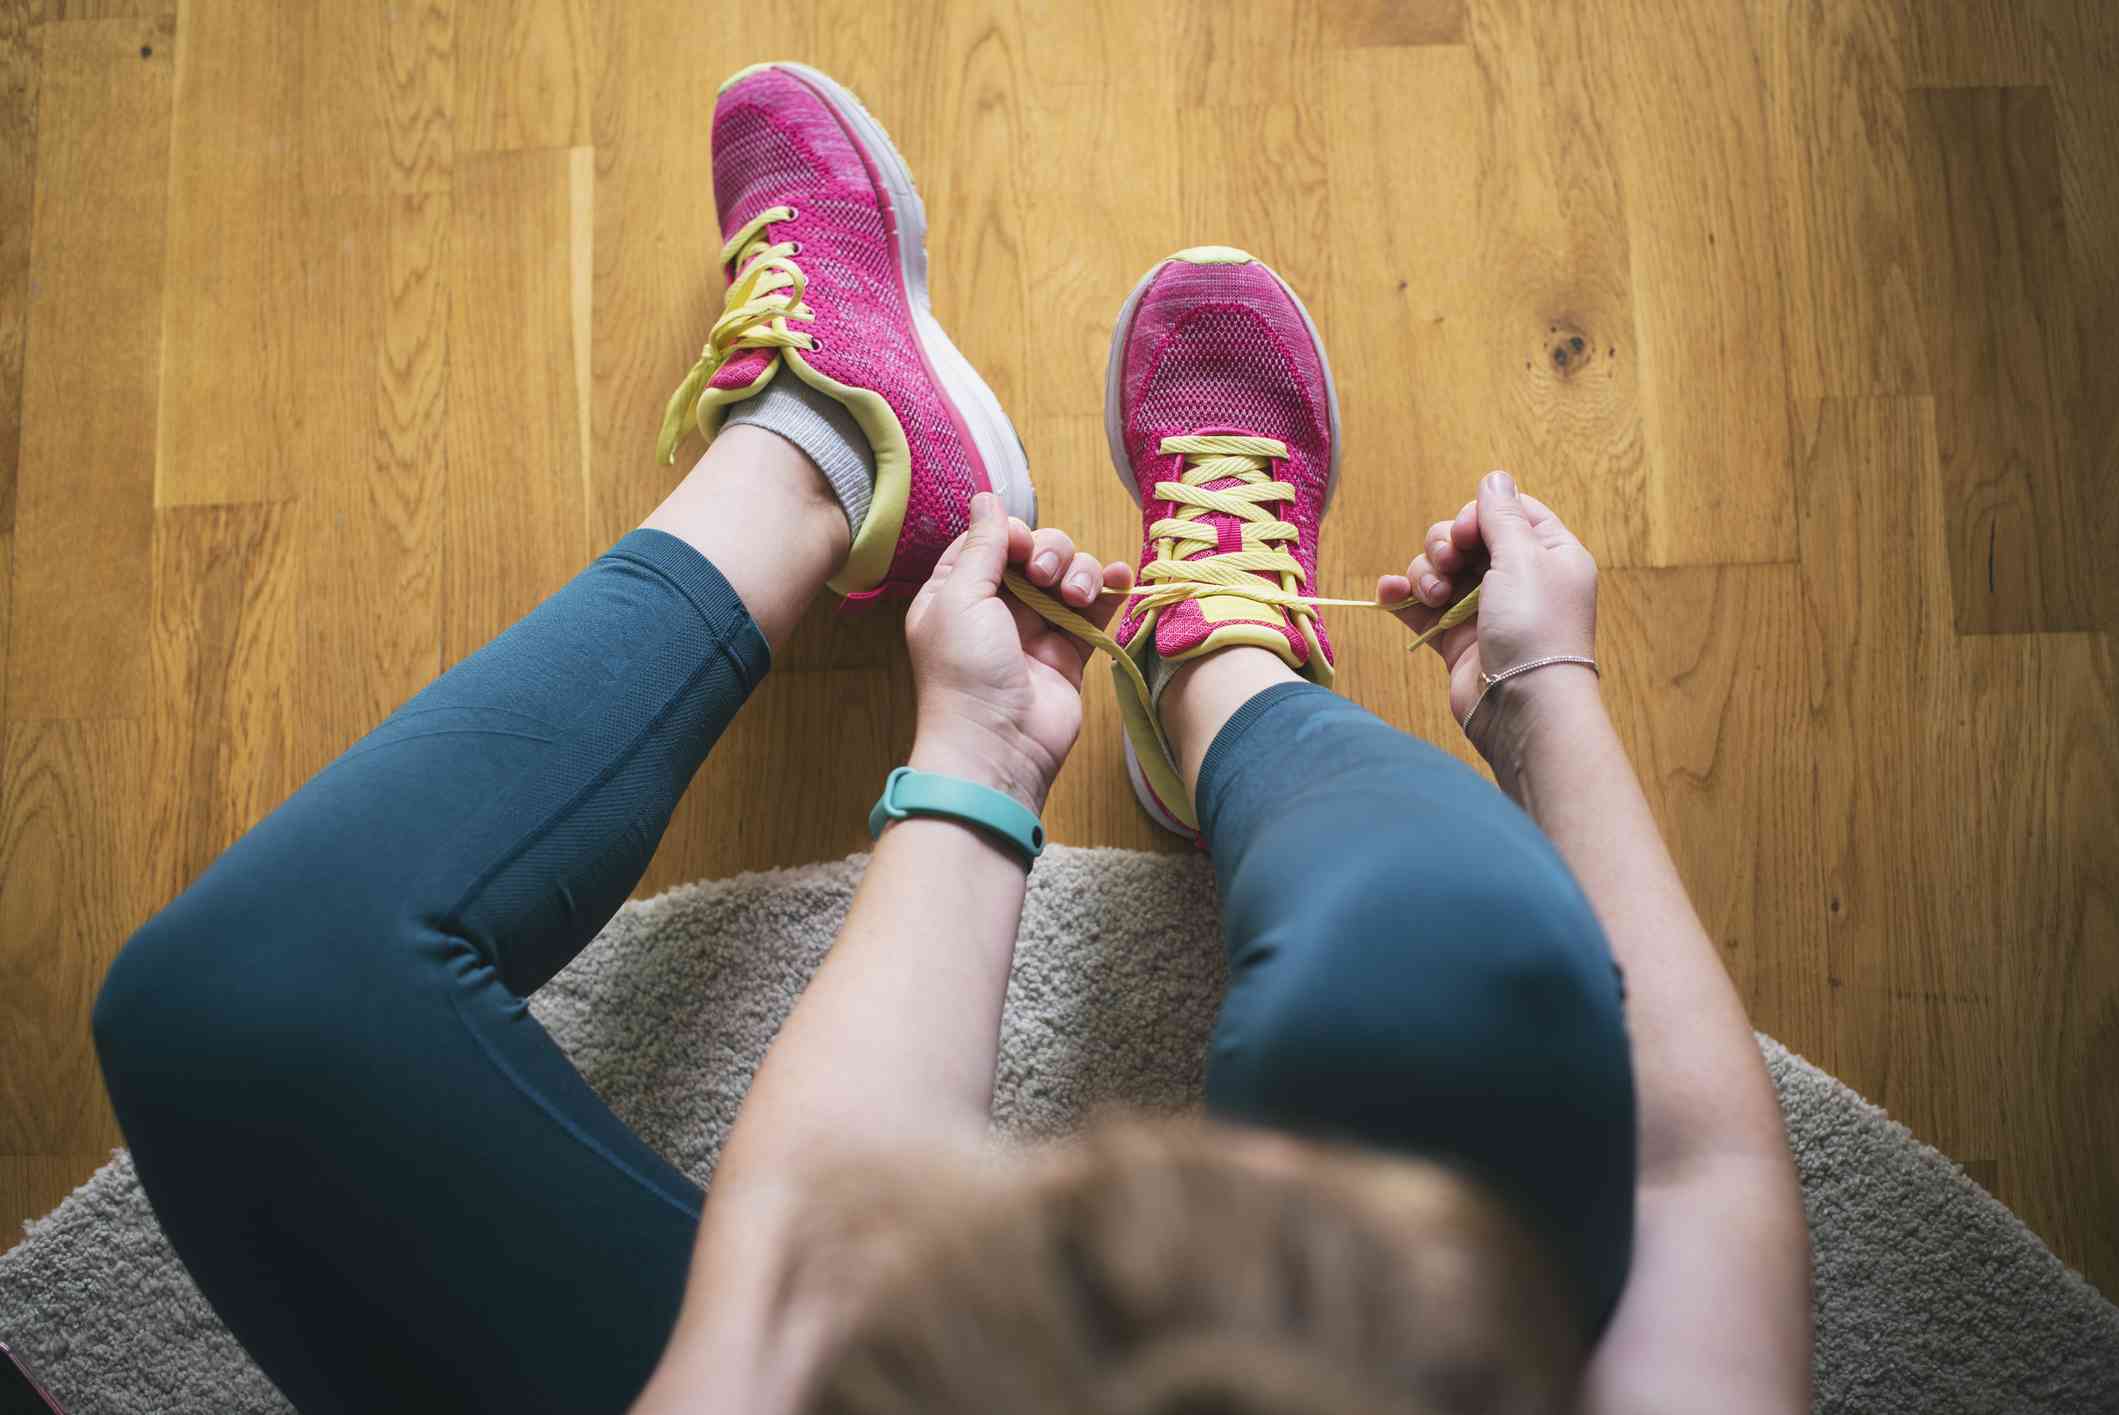 A woman wearing pink running shoes sitting on the floor while tying her shoelace